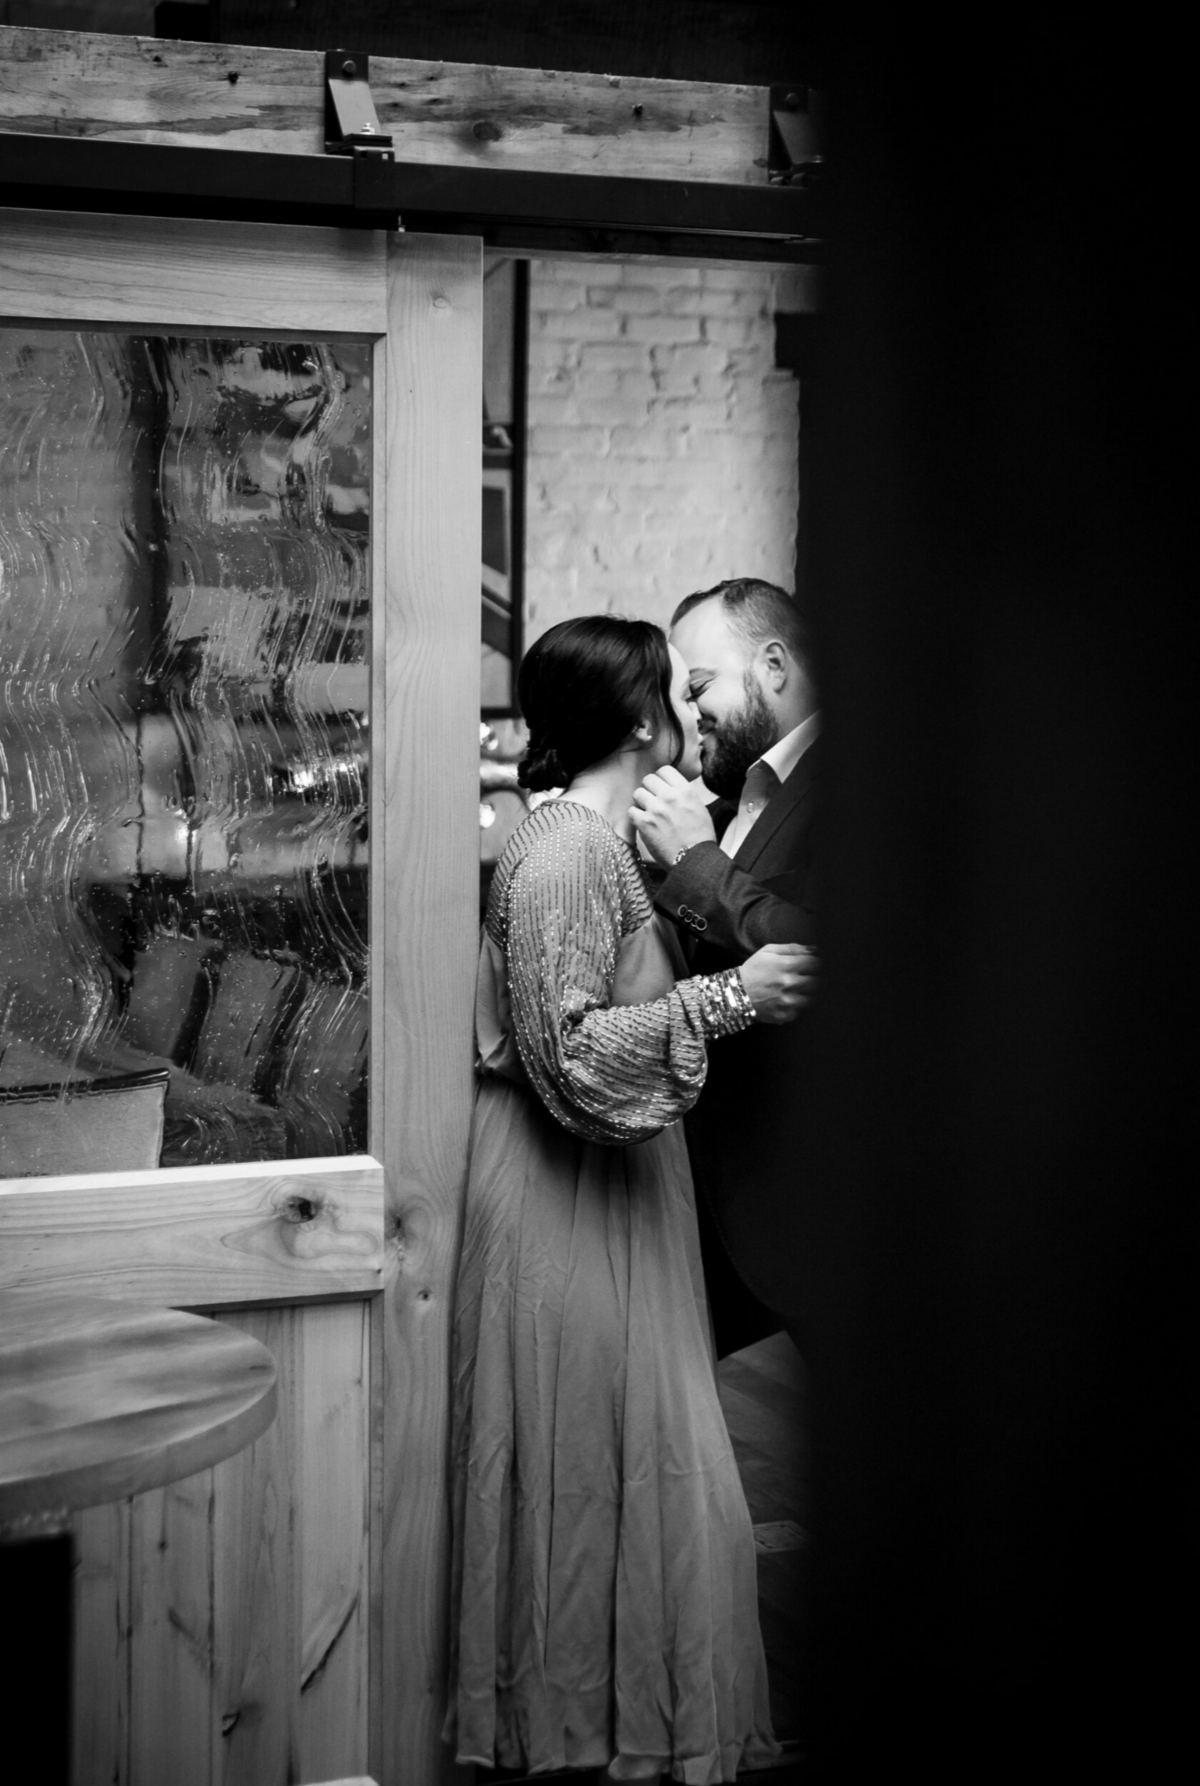 The camera peeks around a wall at a man leaning in for a kiss with his fiancée.